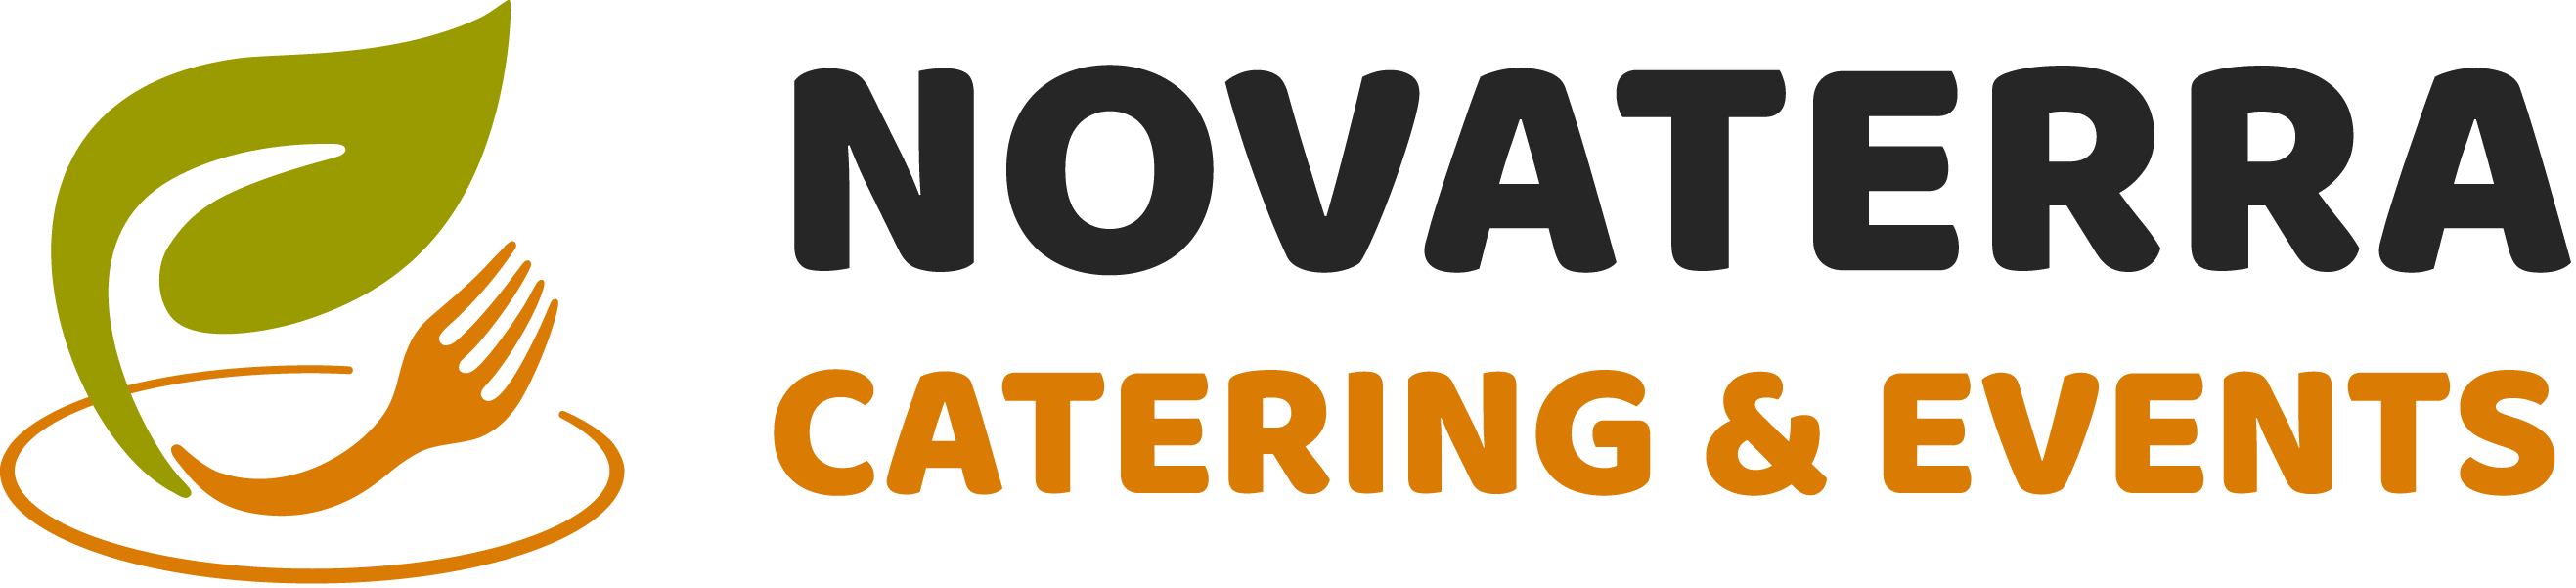 Novaterra Catering & Events